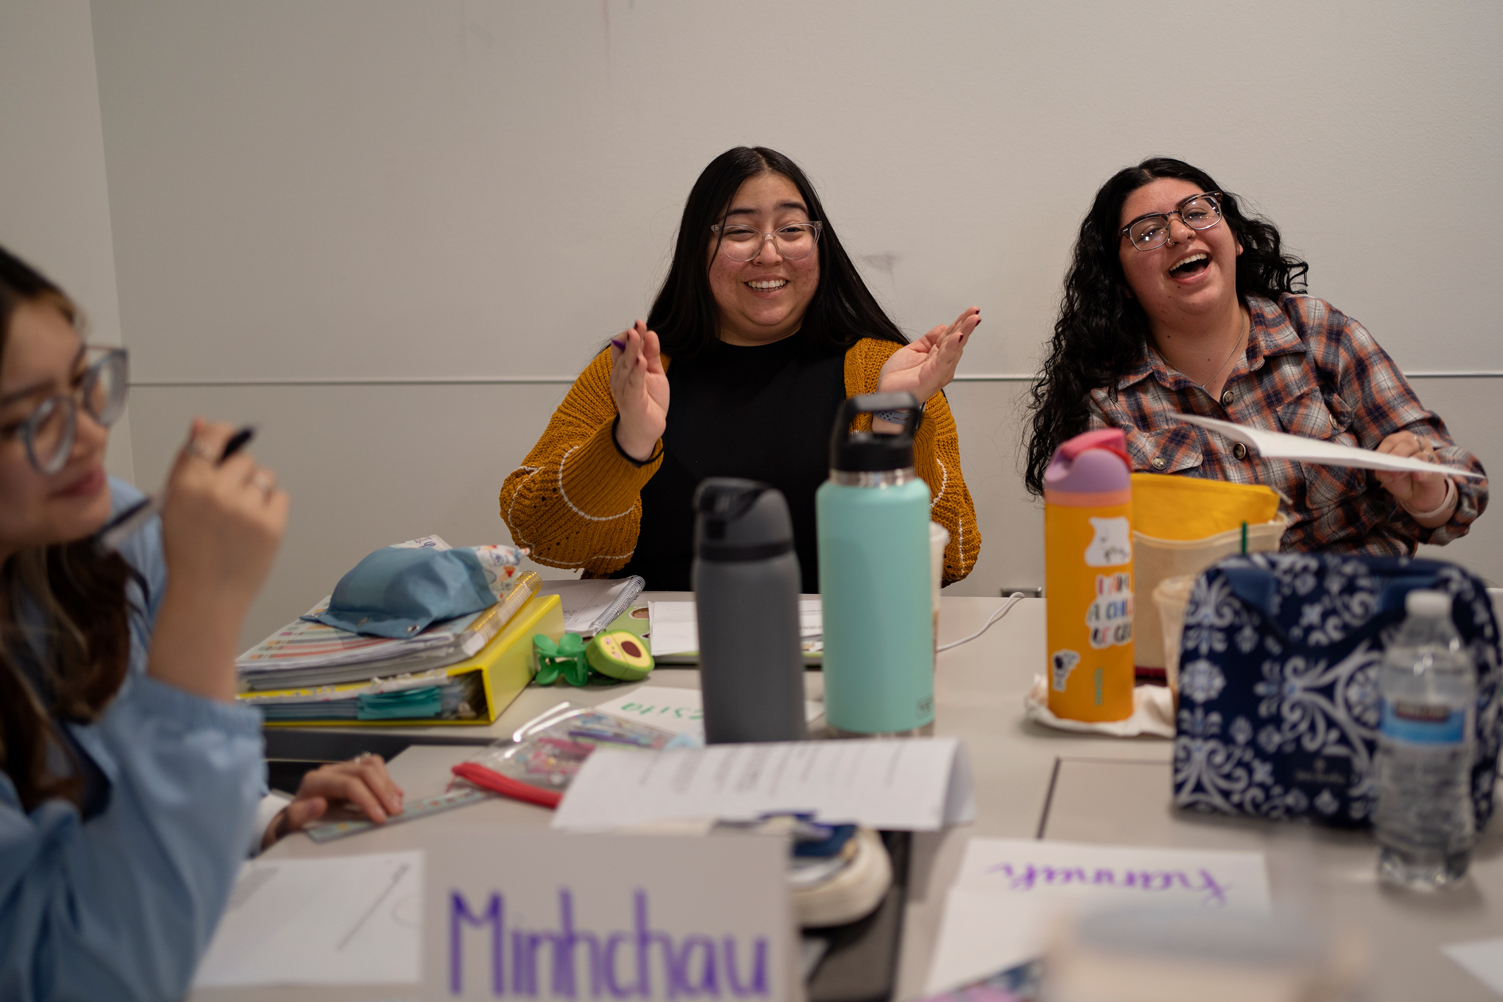 Teresita Quiroz, center left, and Adrianne Herrera, right, laugh during a teacher-certification class with seniors at the University of Houston.